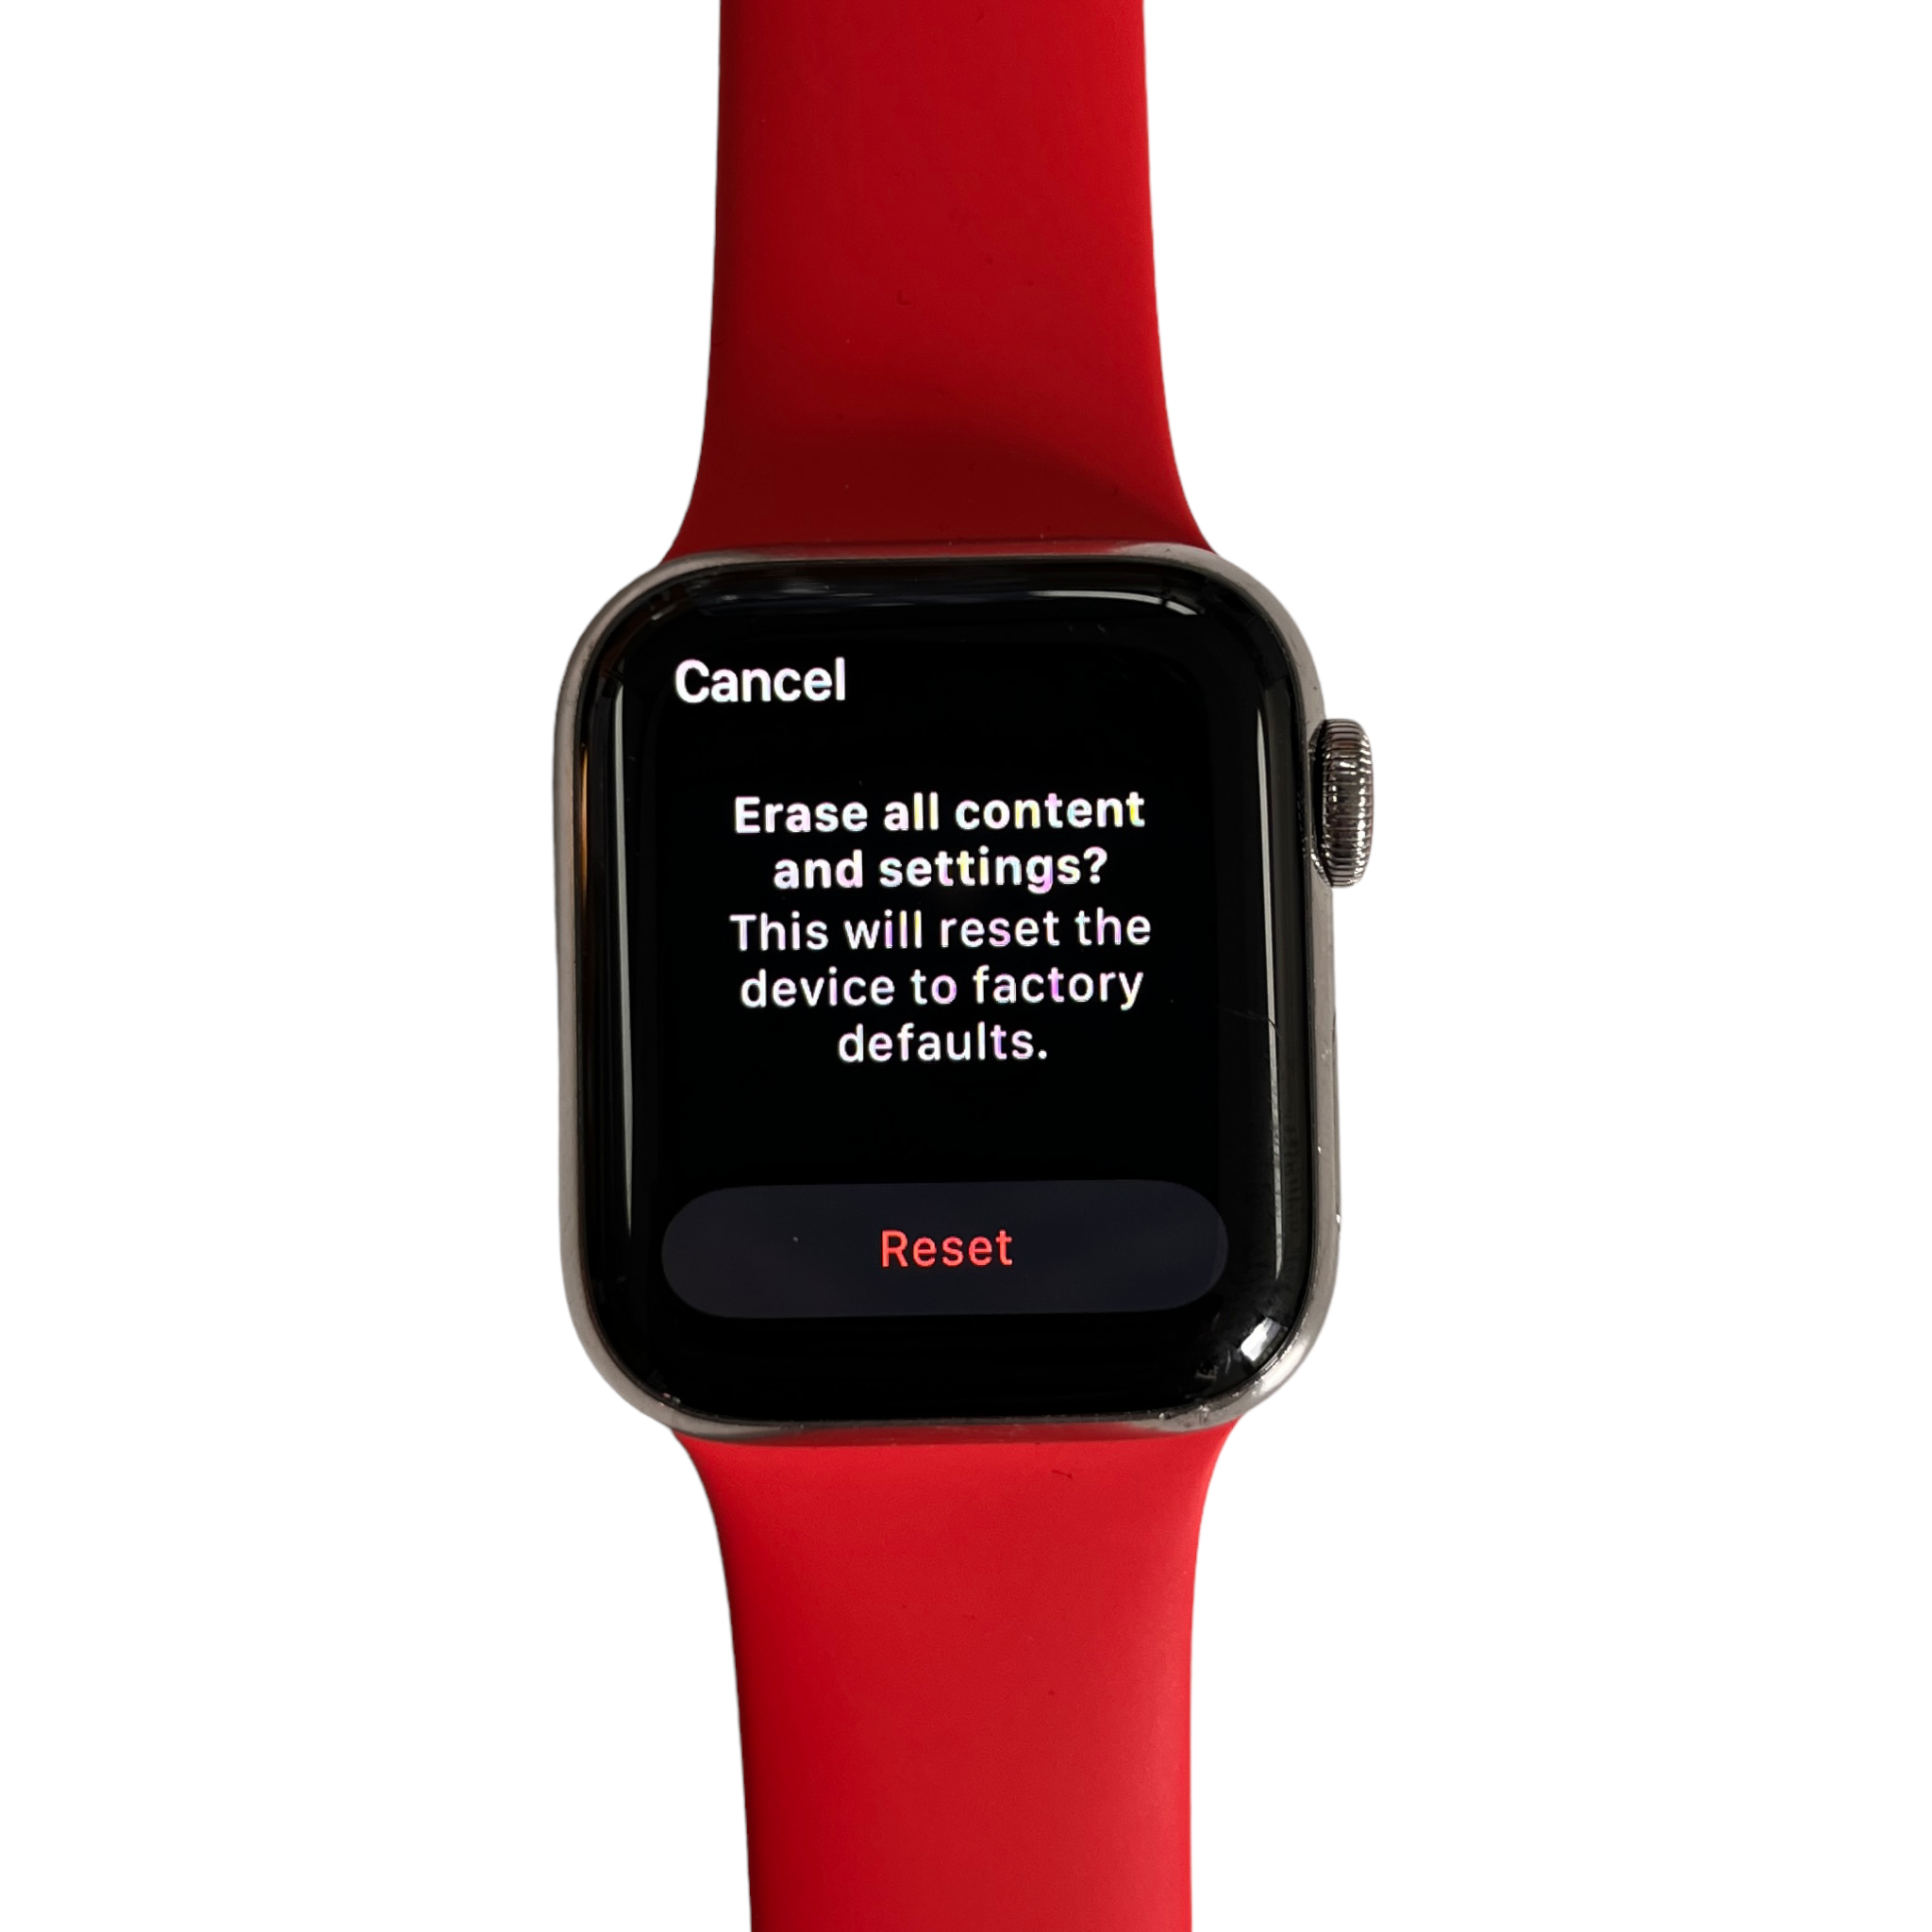 How to Correctly Erase and Reset Apple Watch Before Selling